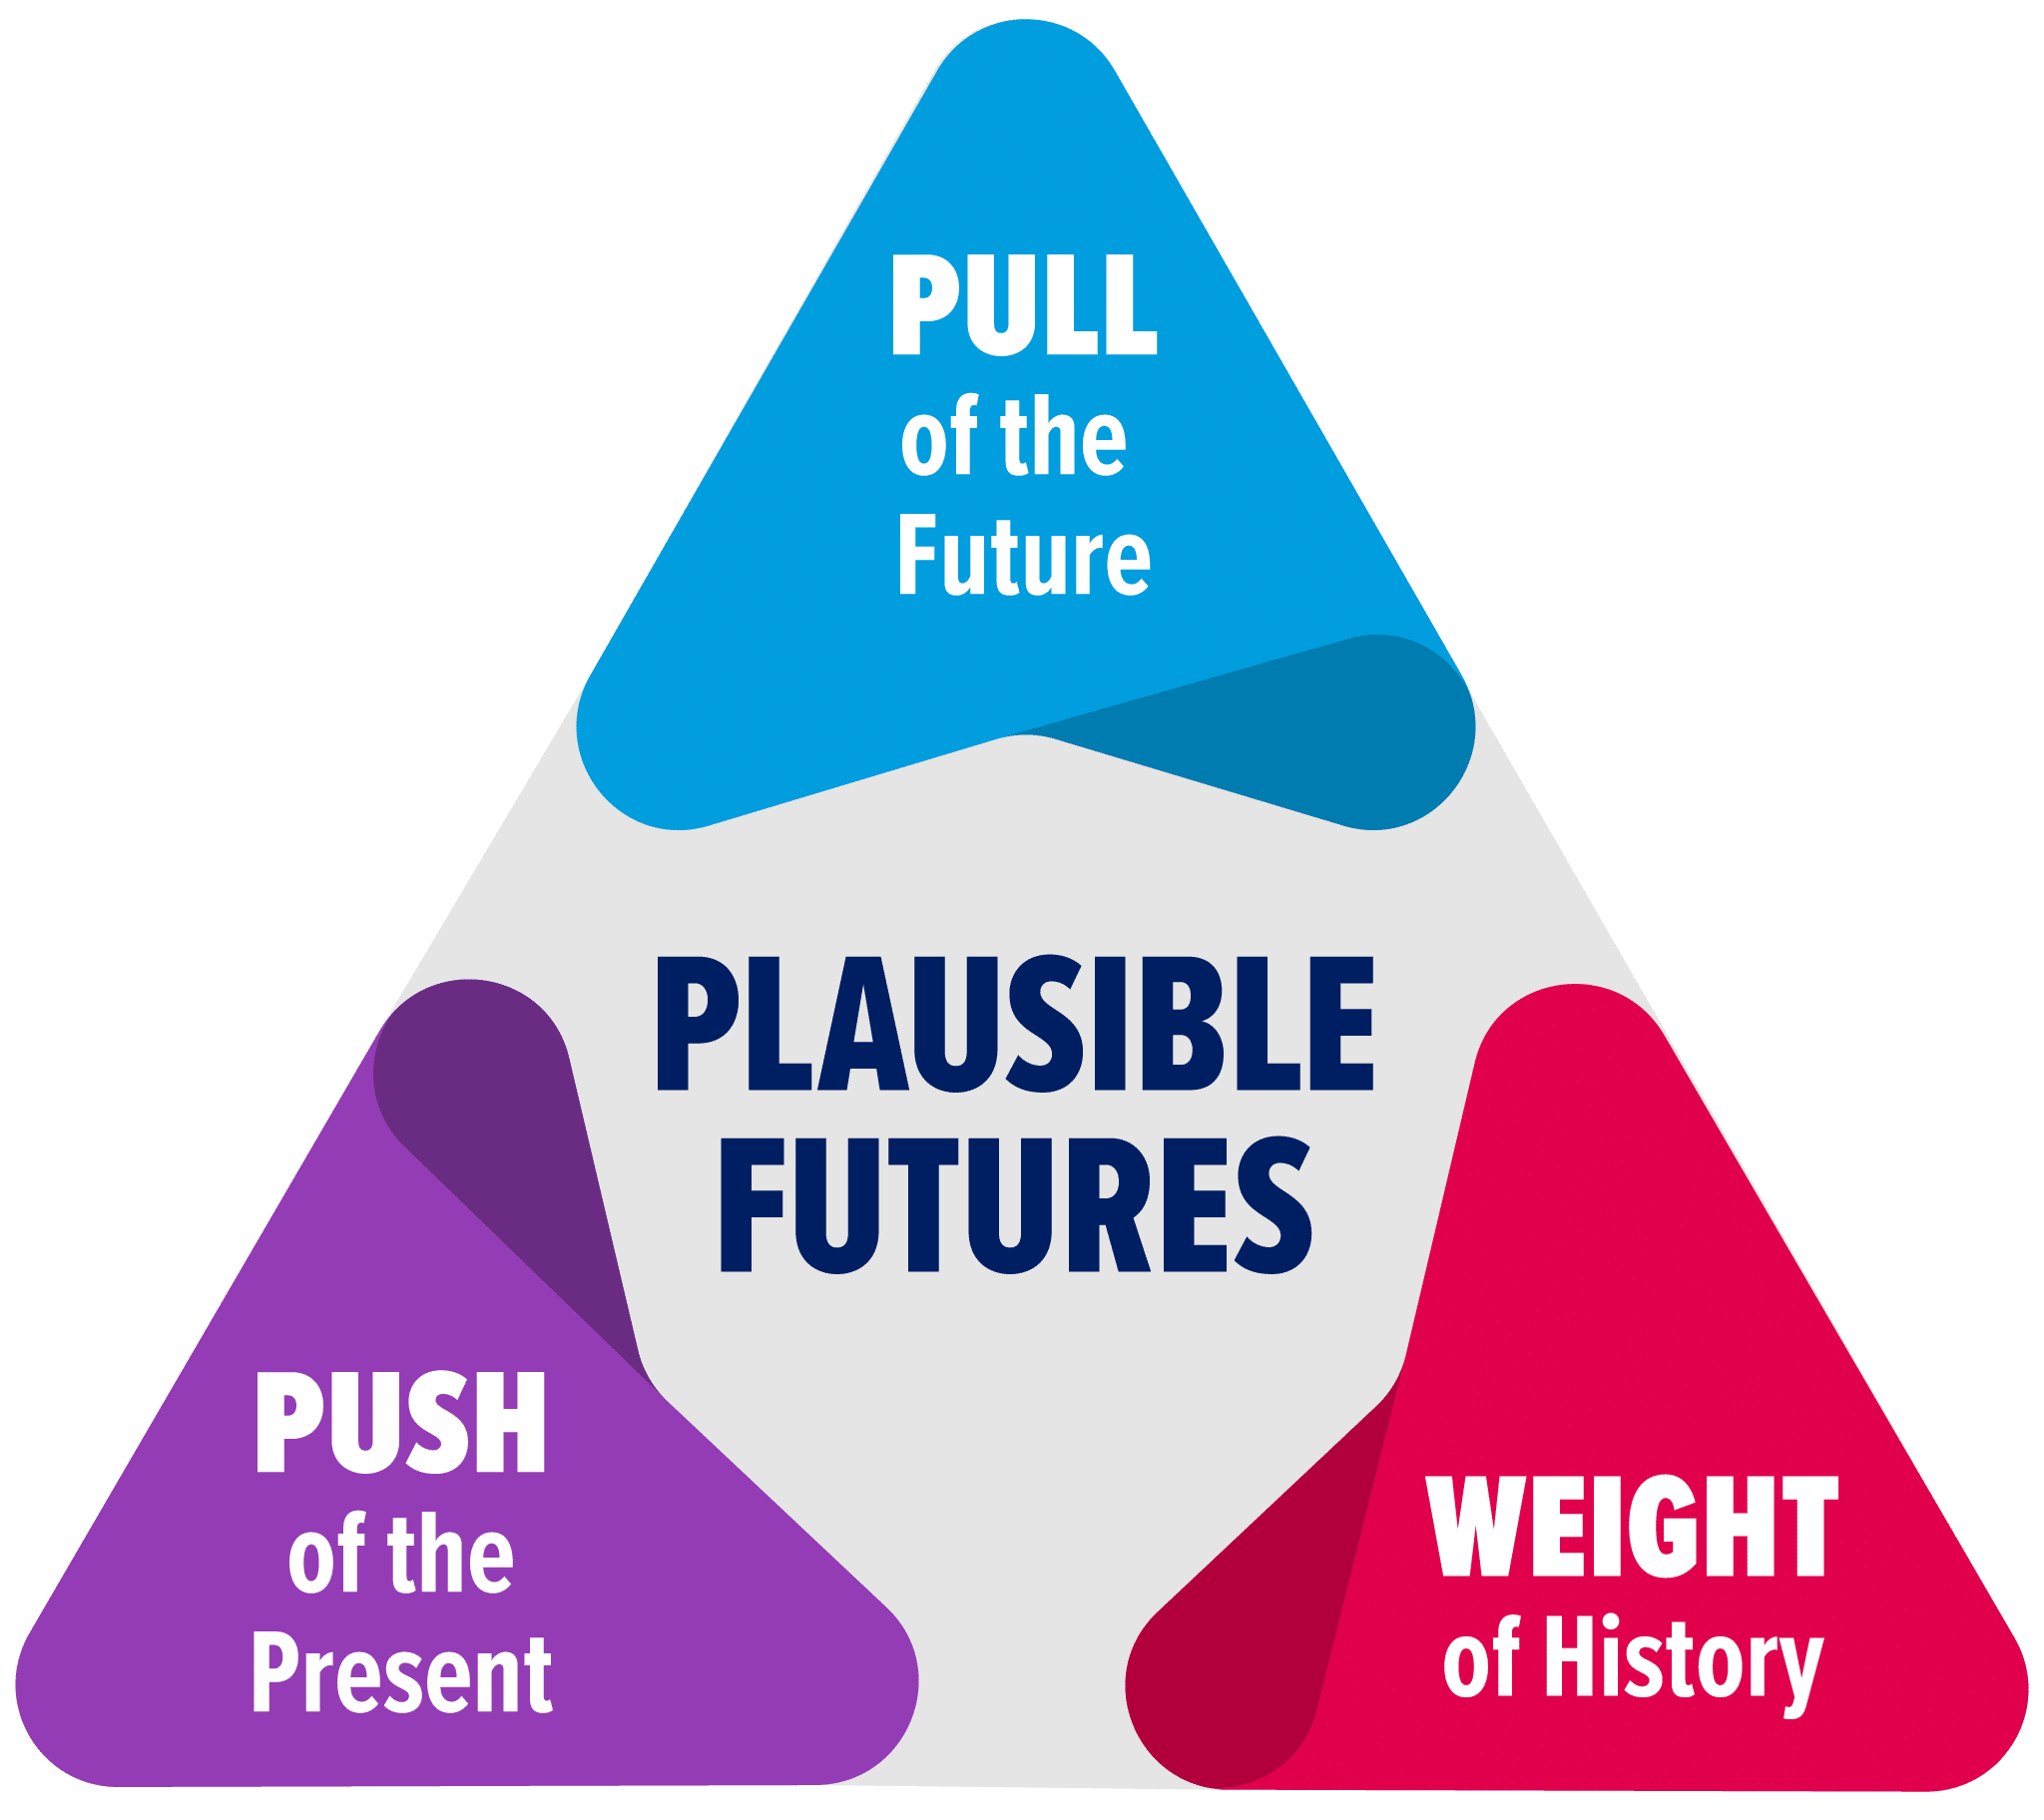 Futures Triangle: a triangle, with "Pull of the Future" in the top corner, "Weight of history" in the bottom right and "push of the present" in the bottom left, surrounding "Plausible Futures" in the center.